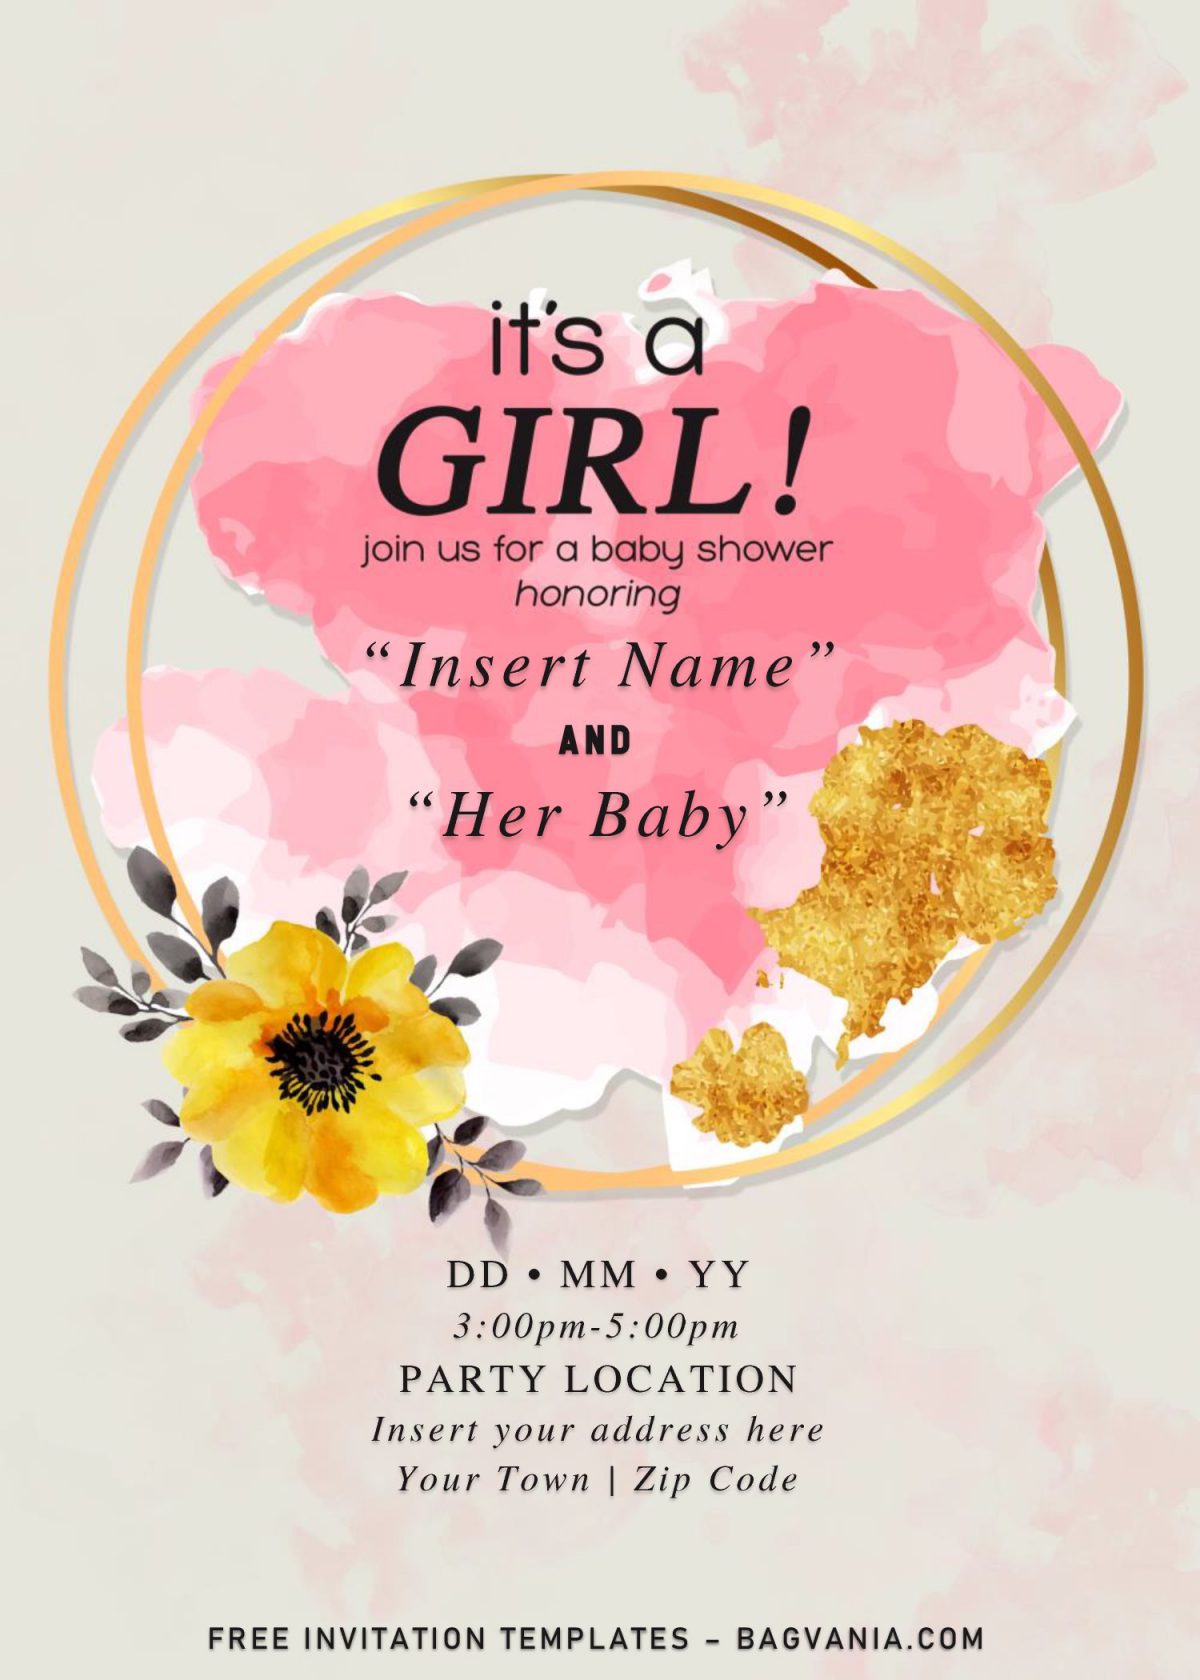 Free Gold Glitter Girl Baby Shower Invitation Templates For Word and has 